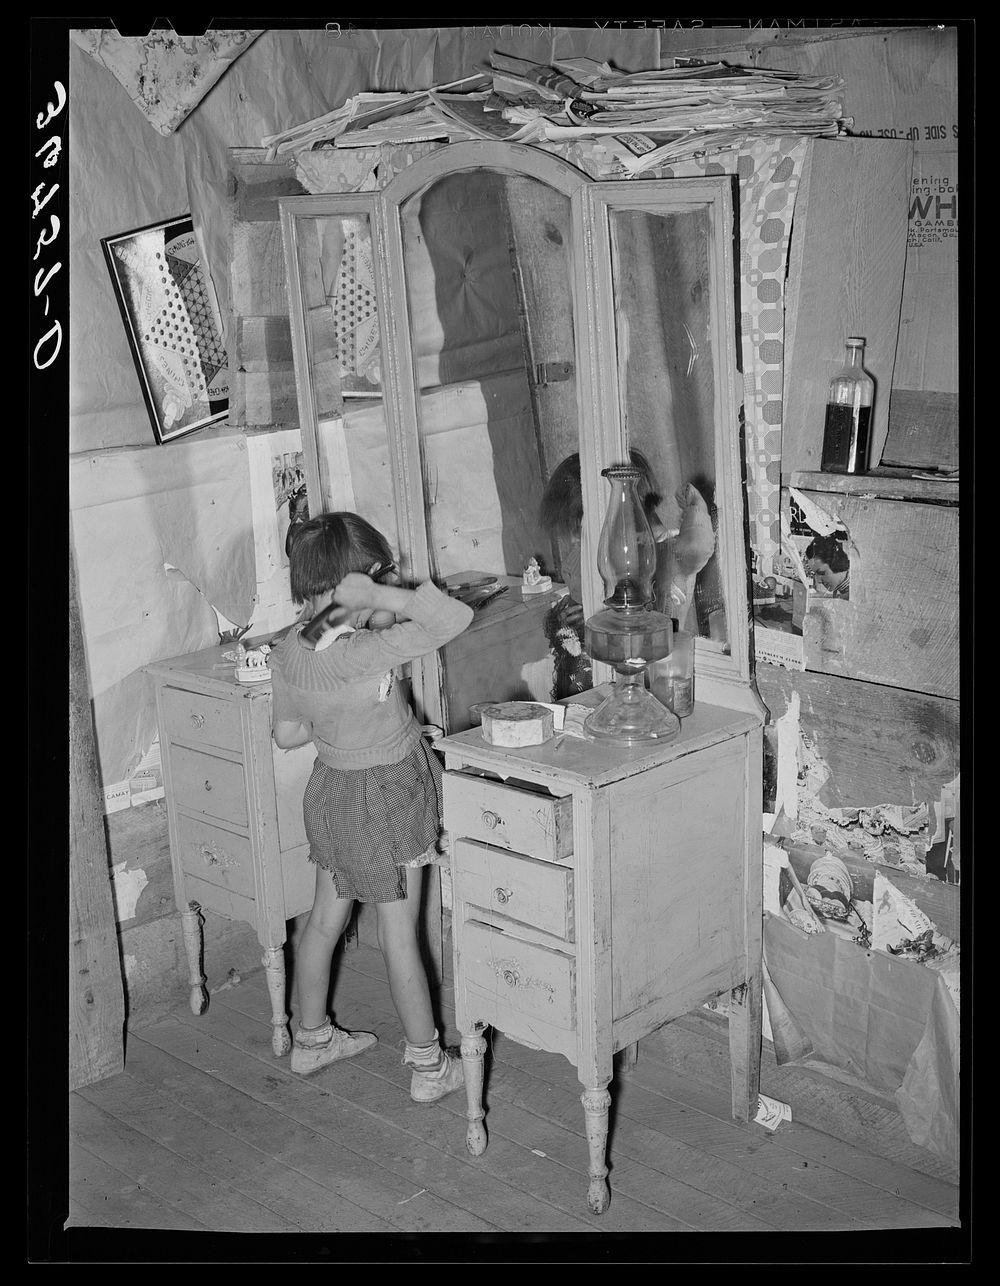 Josie Caudill, homesteader's daughter, combs her hair. Pie Town, New Mexico by Russell Lee